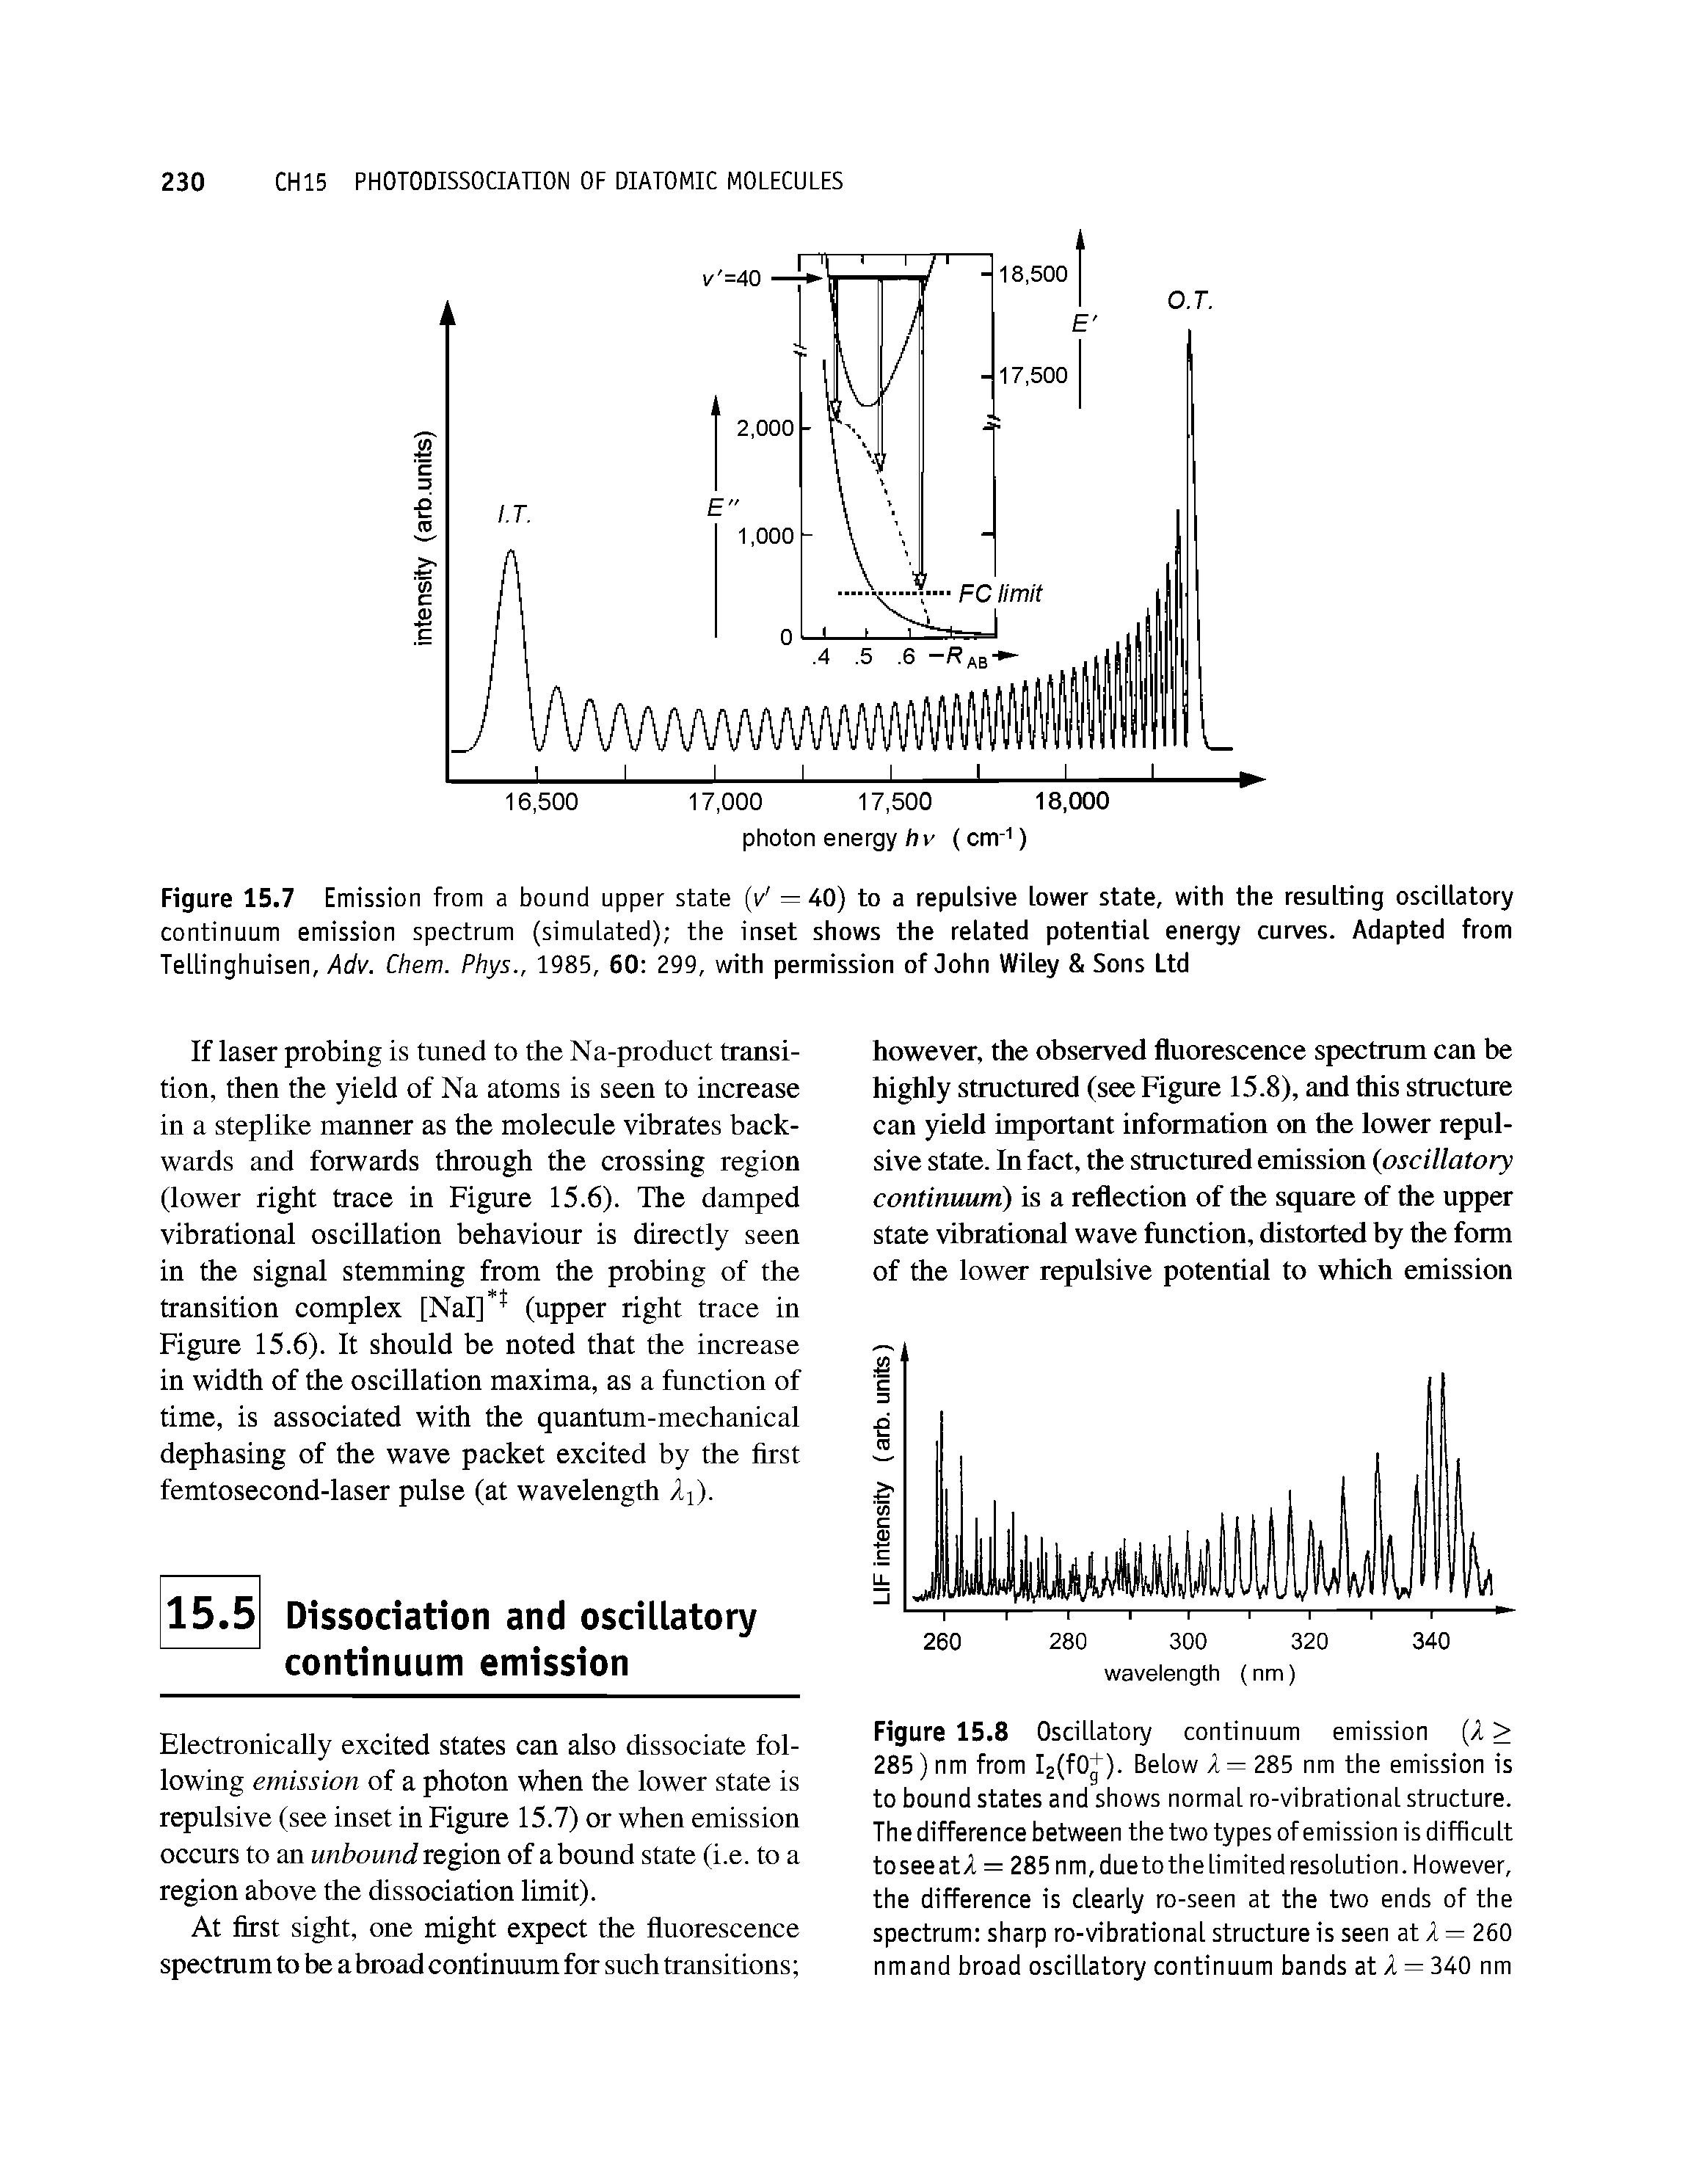 Figure 15.7 Emission from a bound upper state (/ =40) to a repulsive lower state, with the resulting oscillatory continuum emission spectrum (simulated) the inset shows the related potential energy curves. Adapted from Tellinghuisen, Adv. Chem. Phys., 1985, 60 299, with permission of John Wiley Sons Ltd...